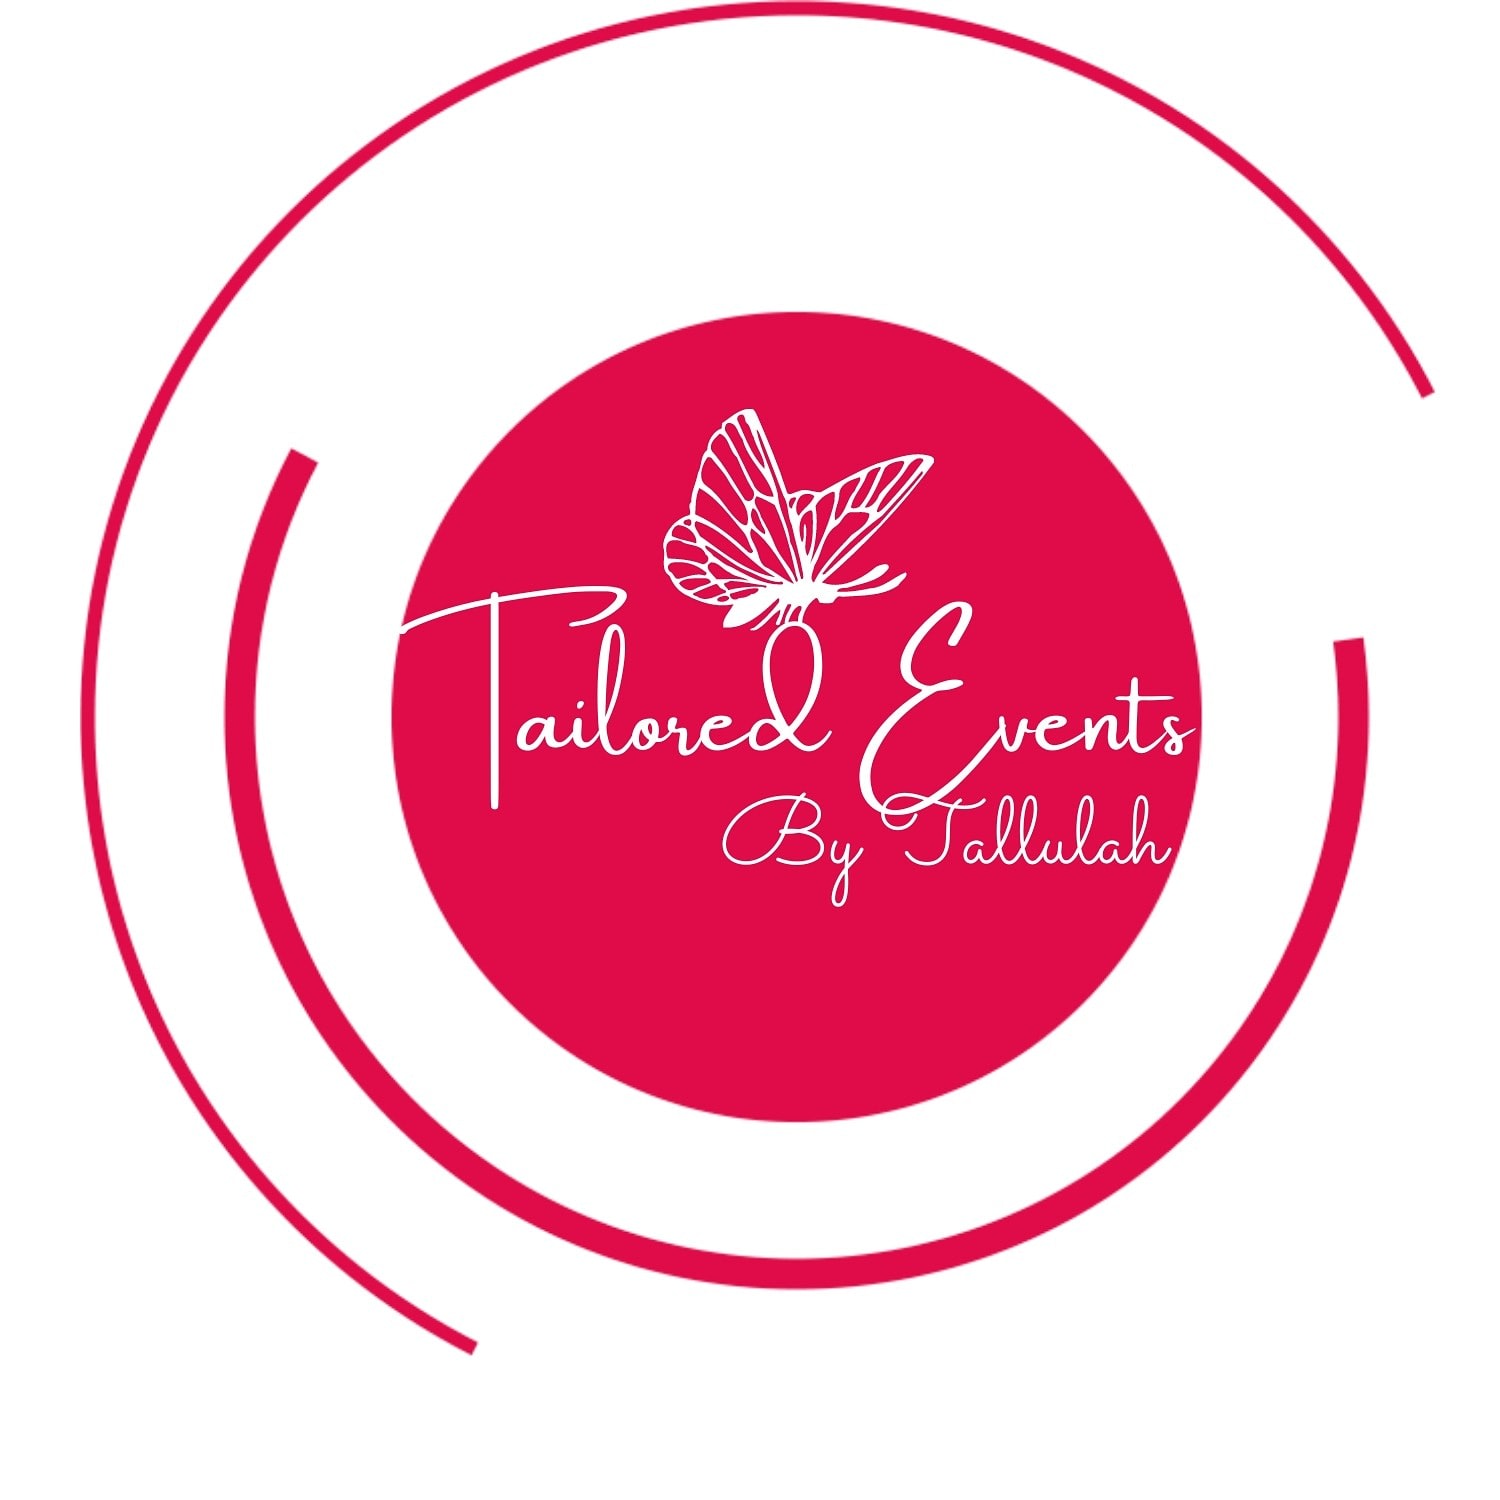 Tailored Events by Tallulah